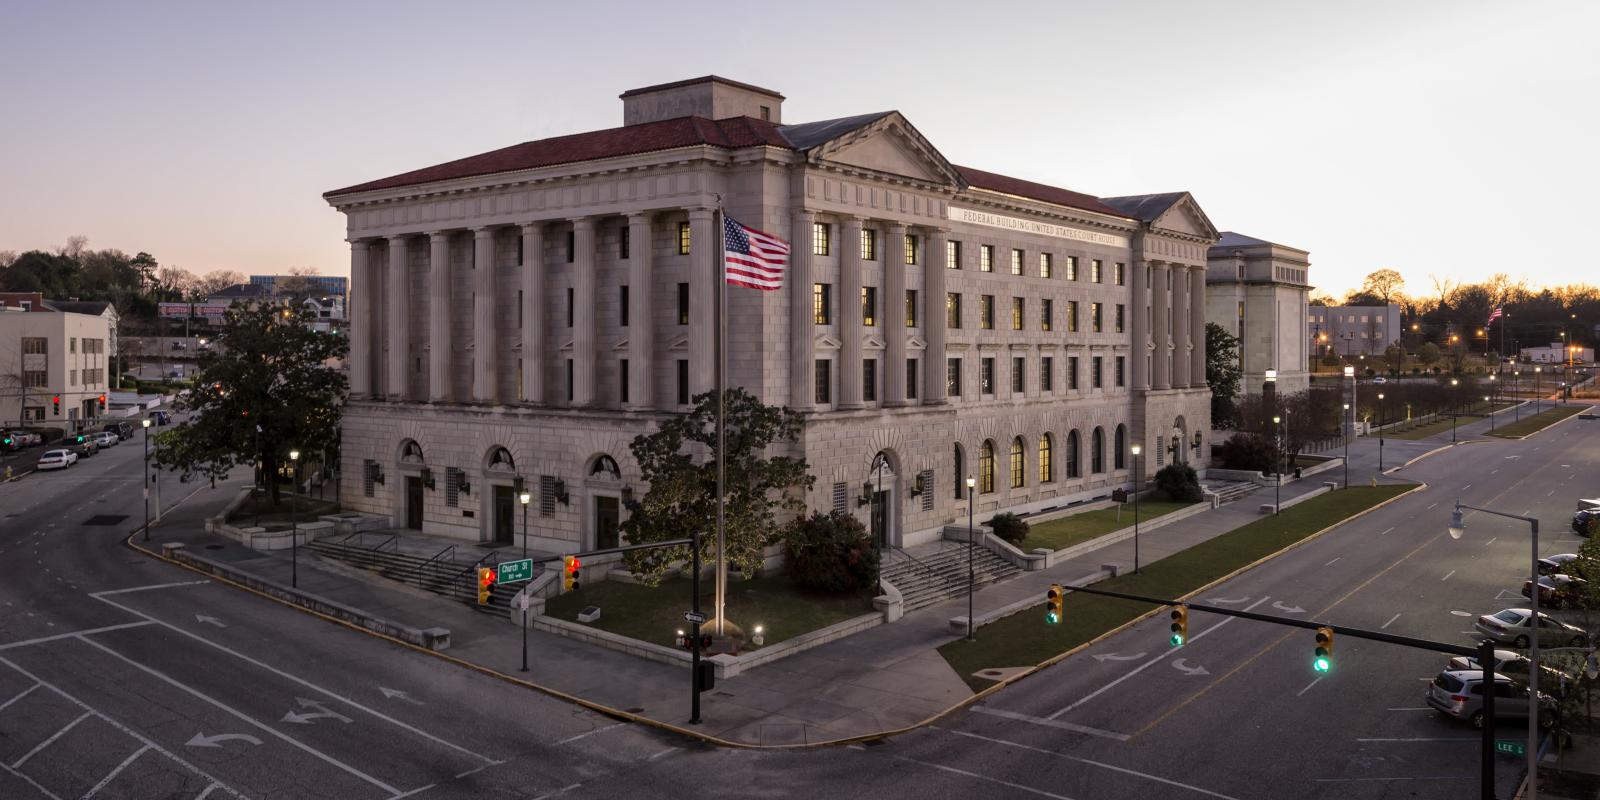 Historic courthouse photo by Jon Cook